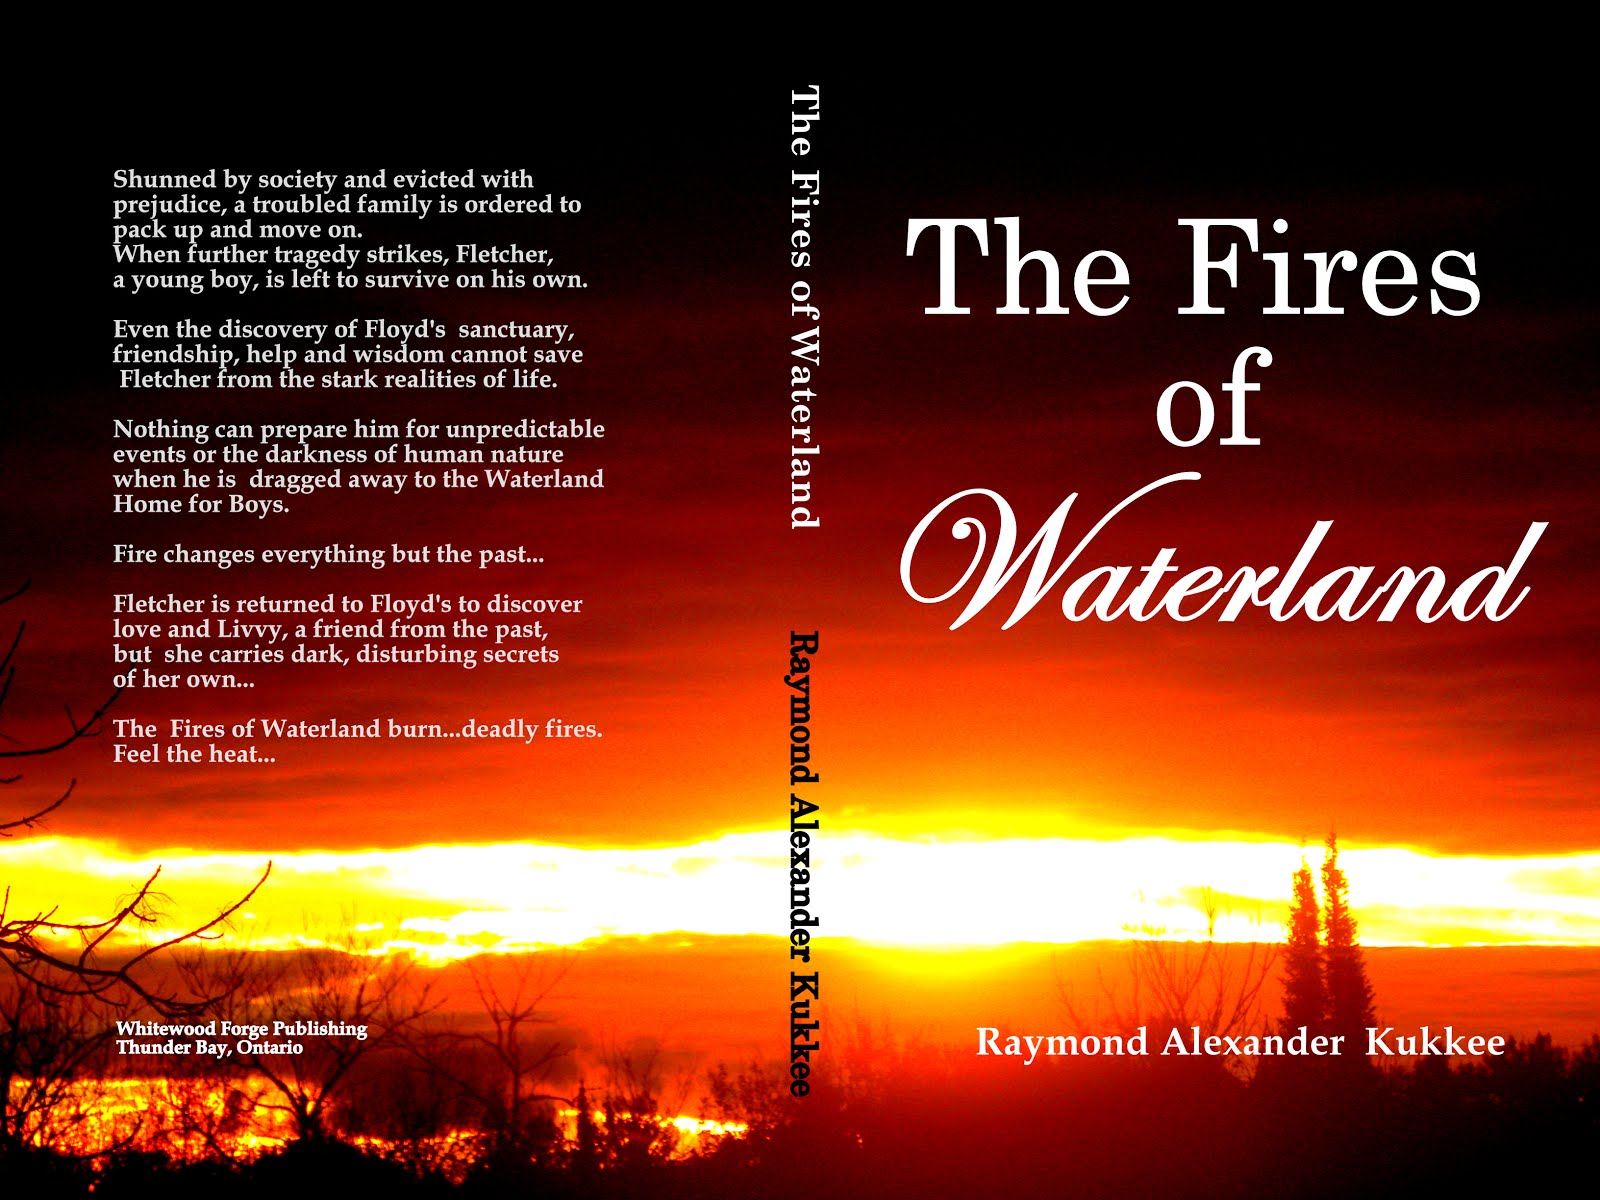 The Fires of Waterland